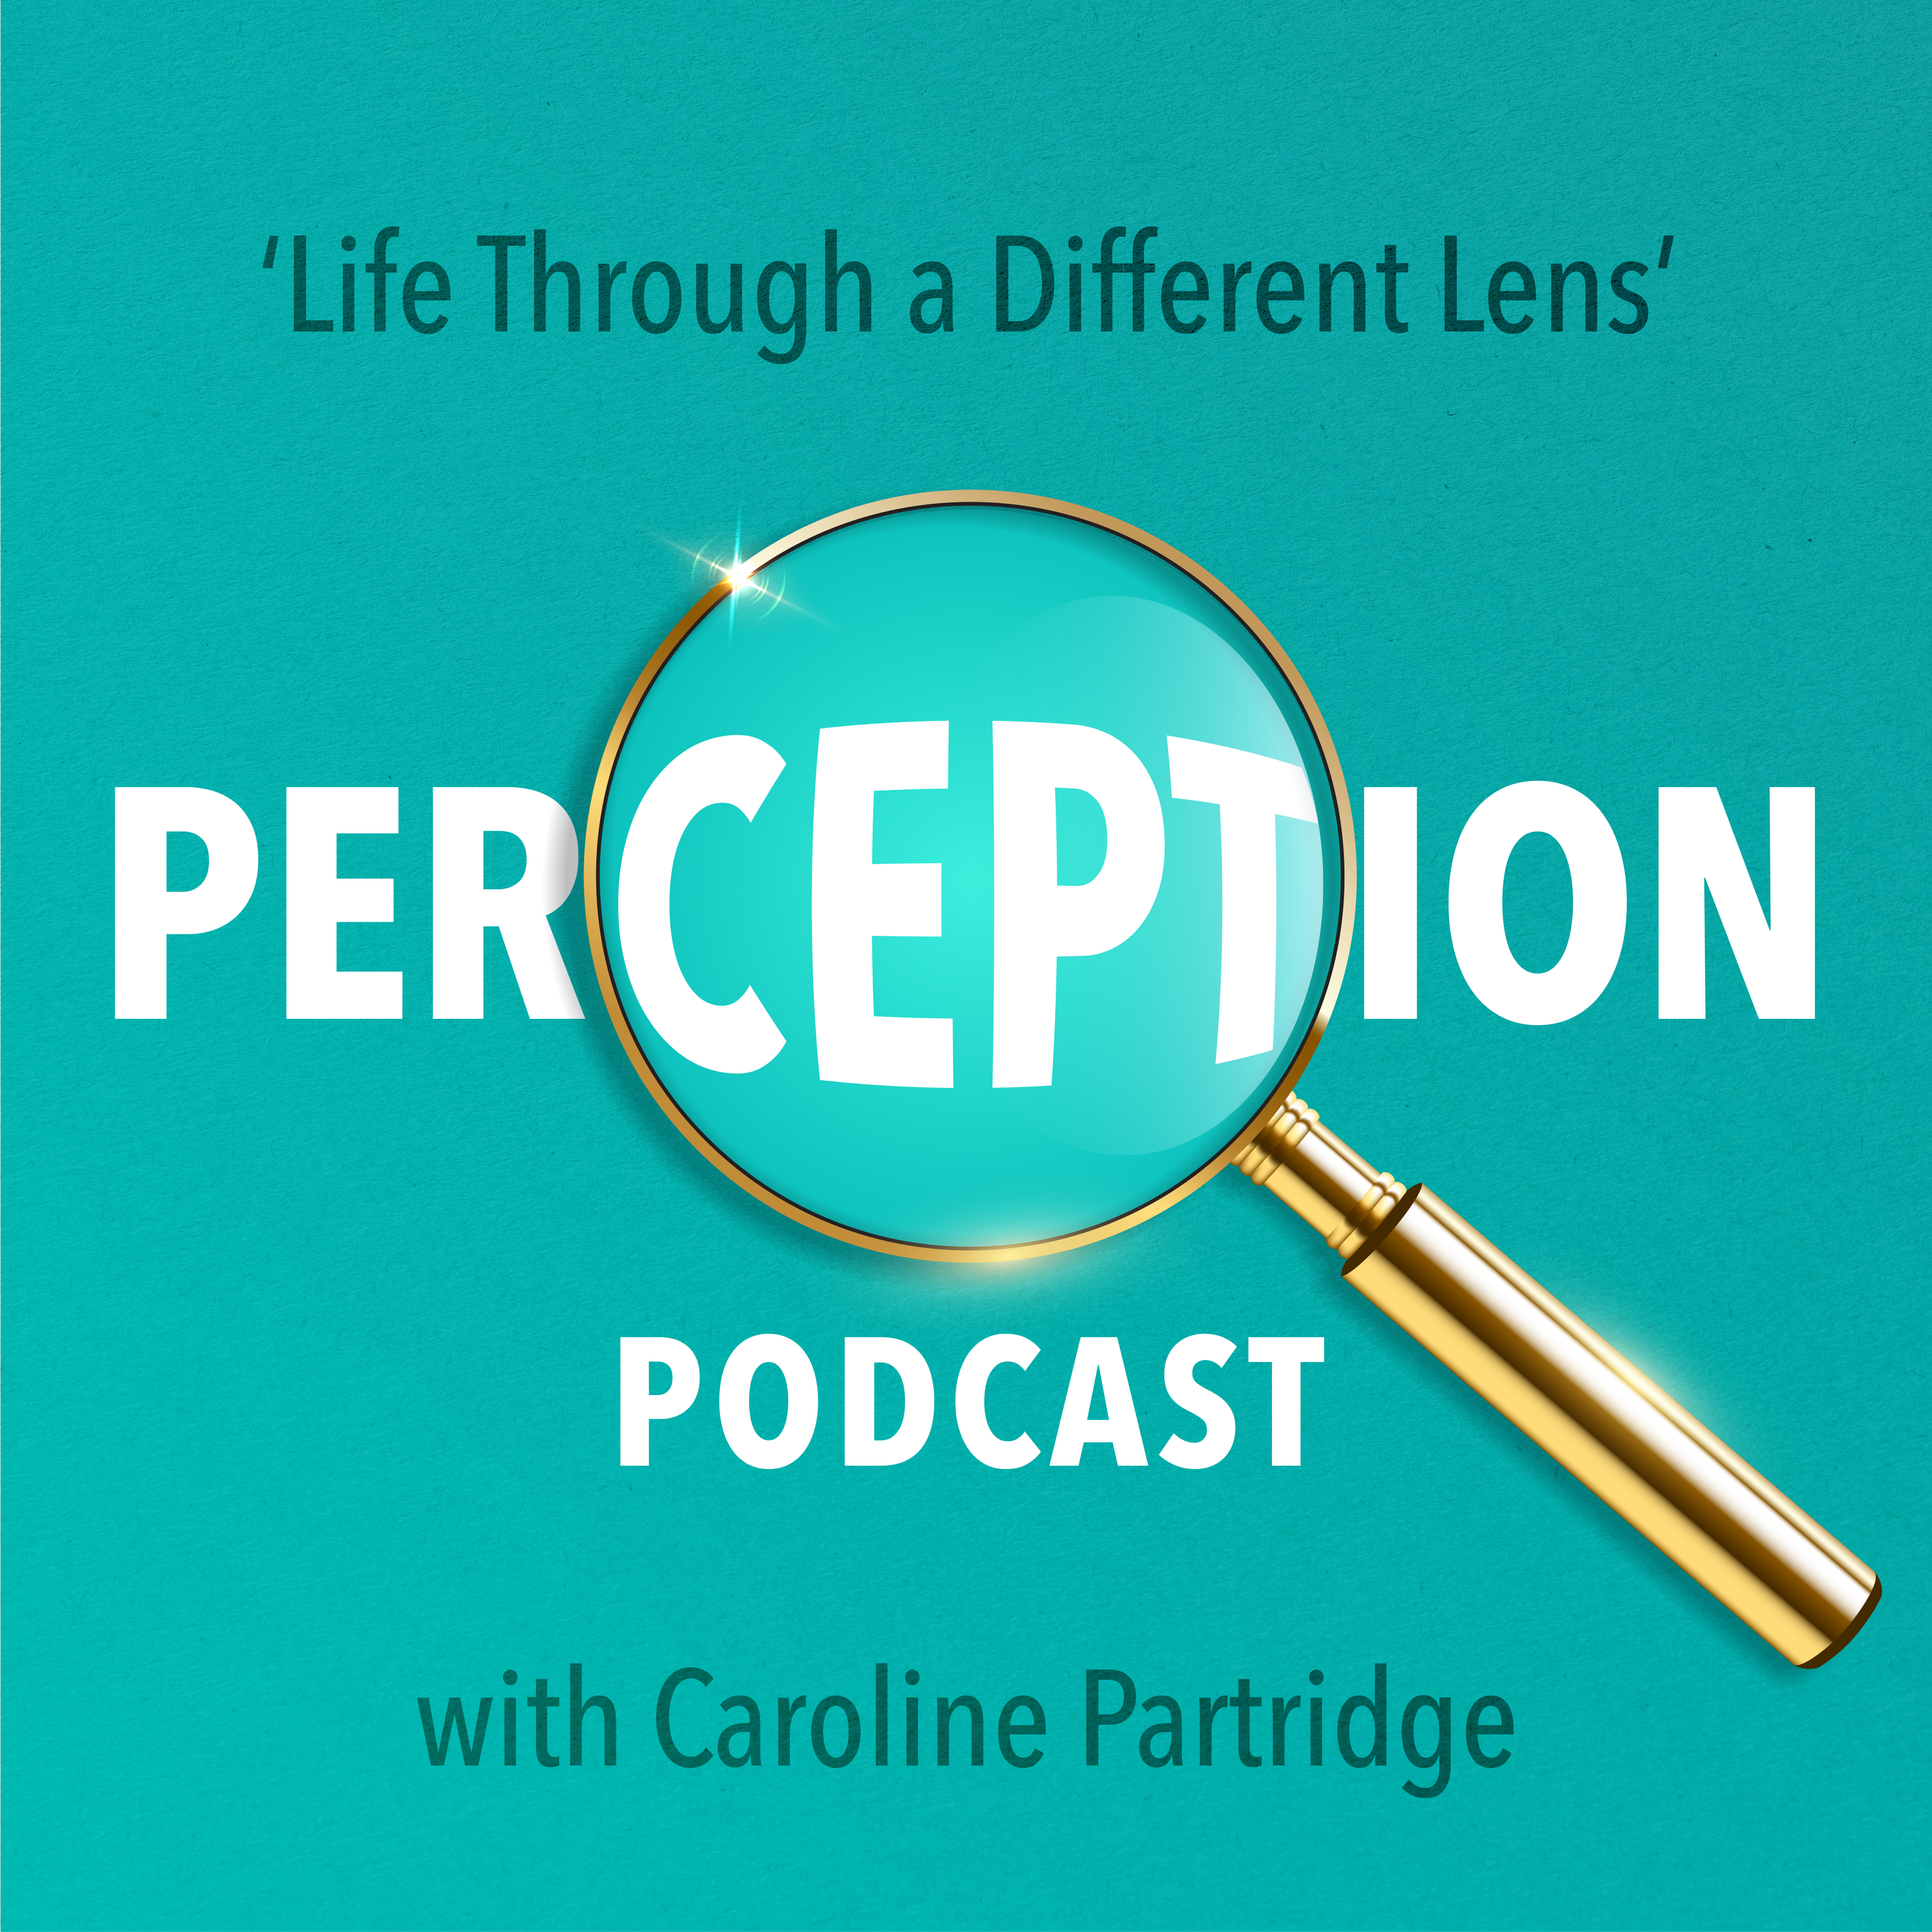 The Perception Podcast is a Year Old!